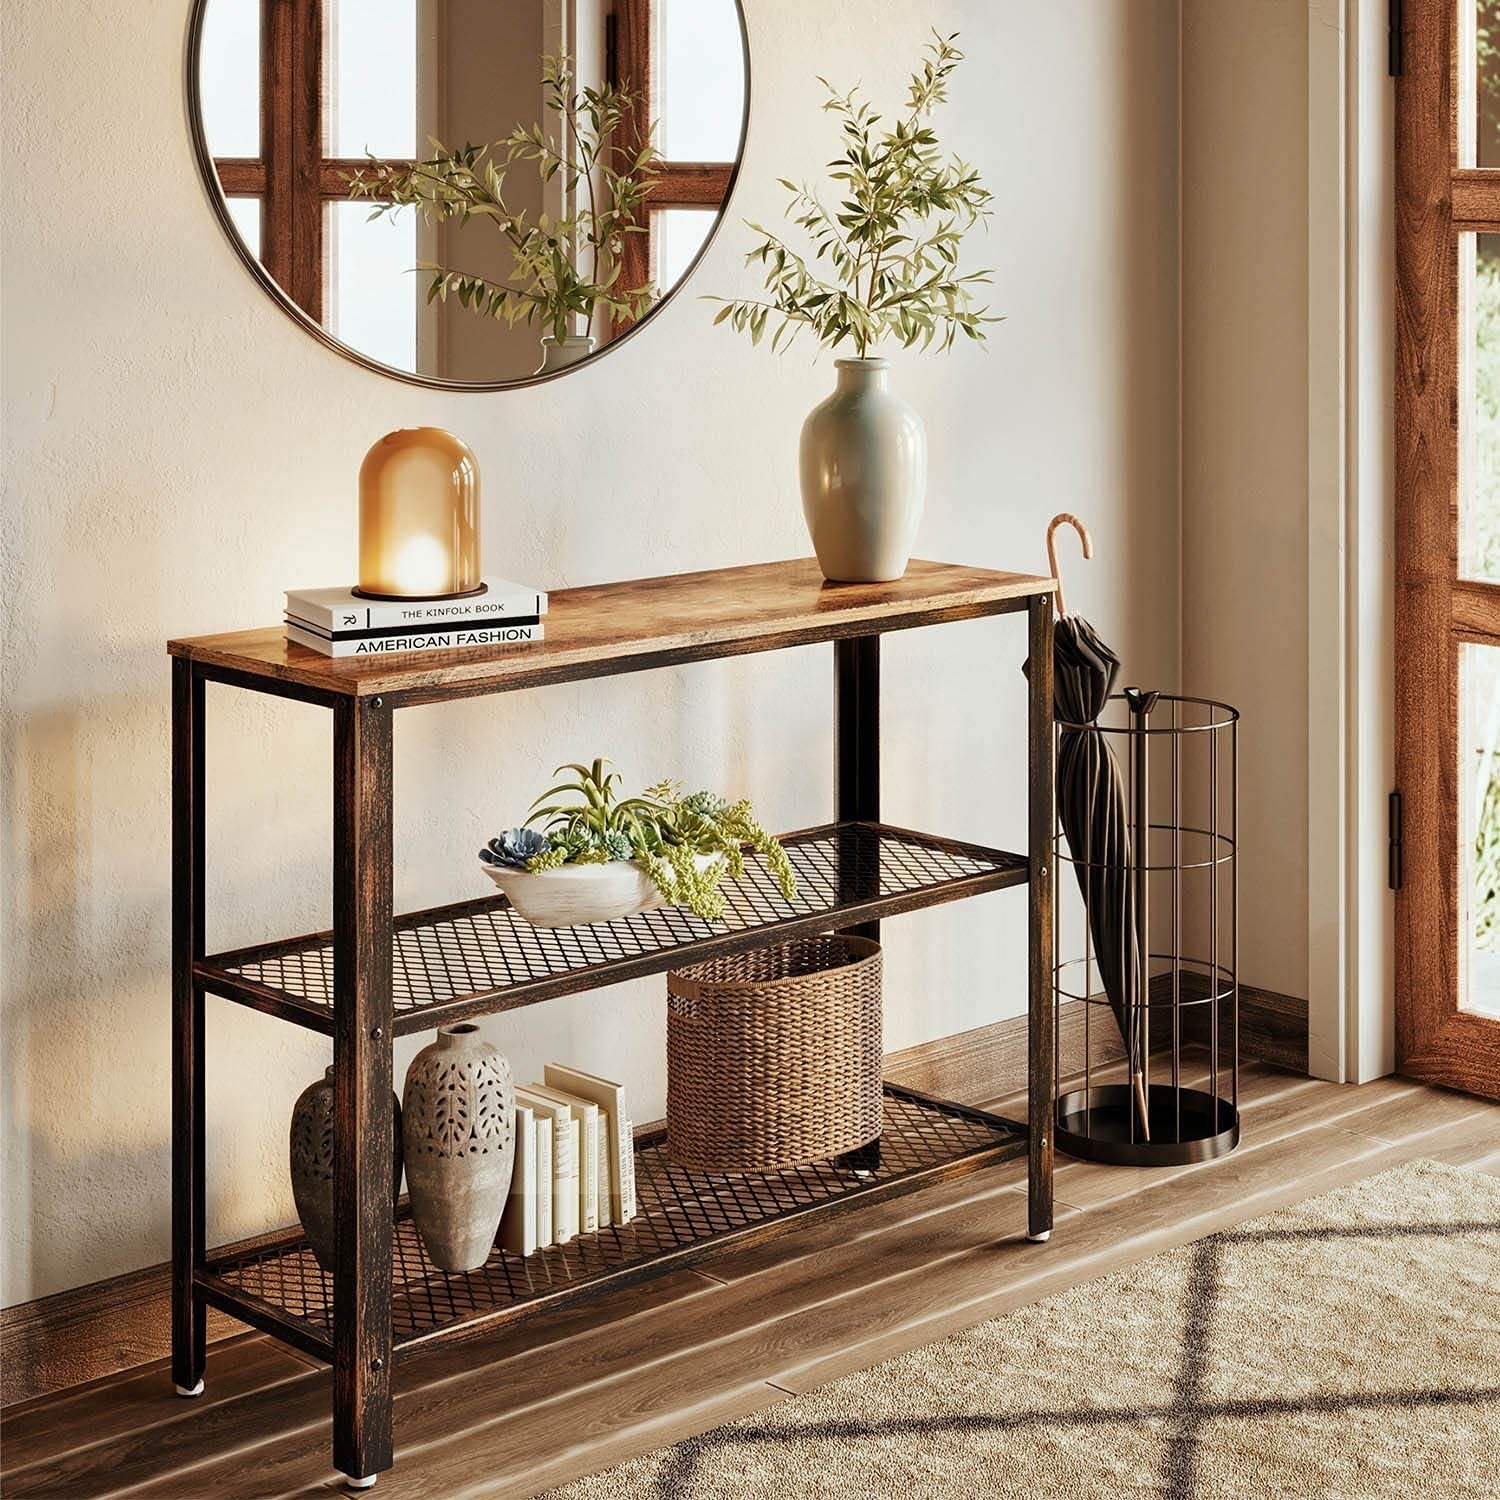 The console table in an entryway